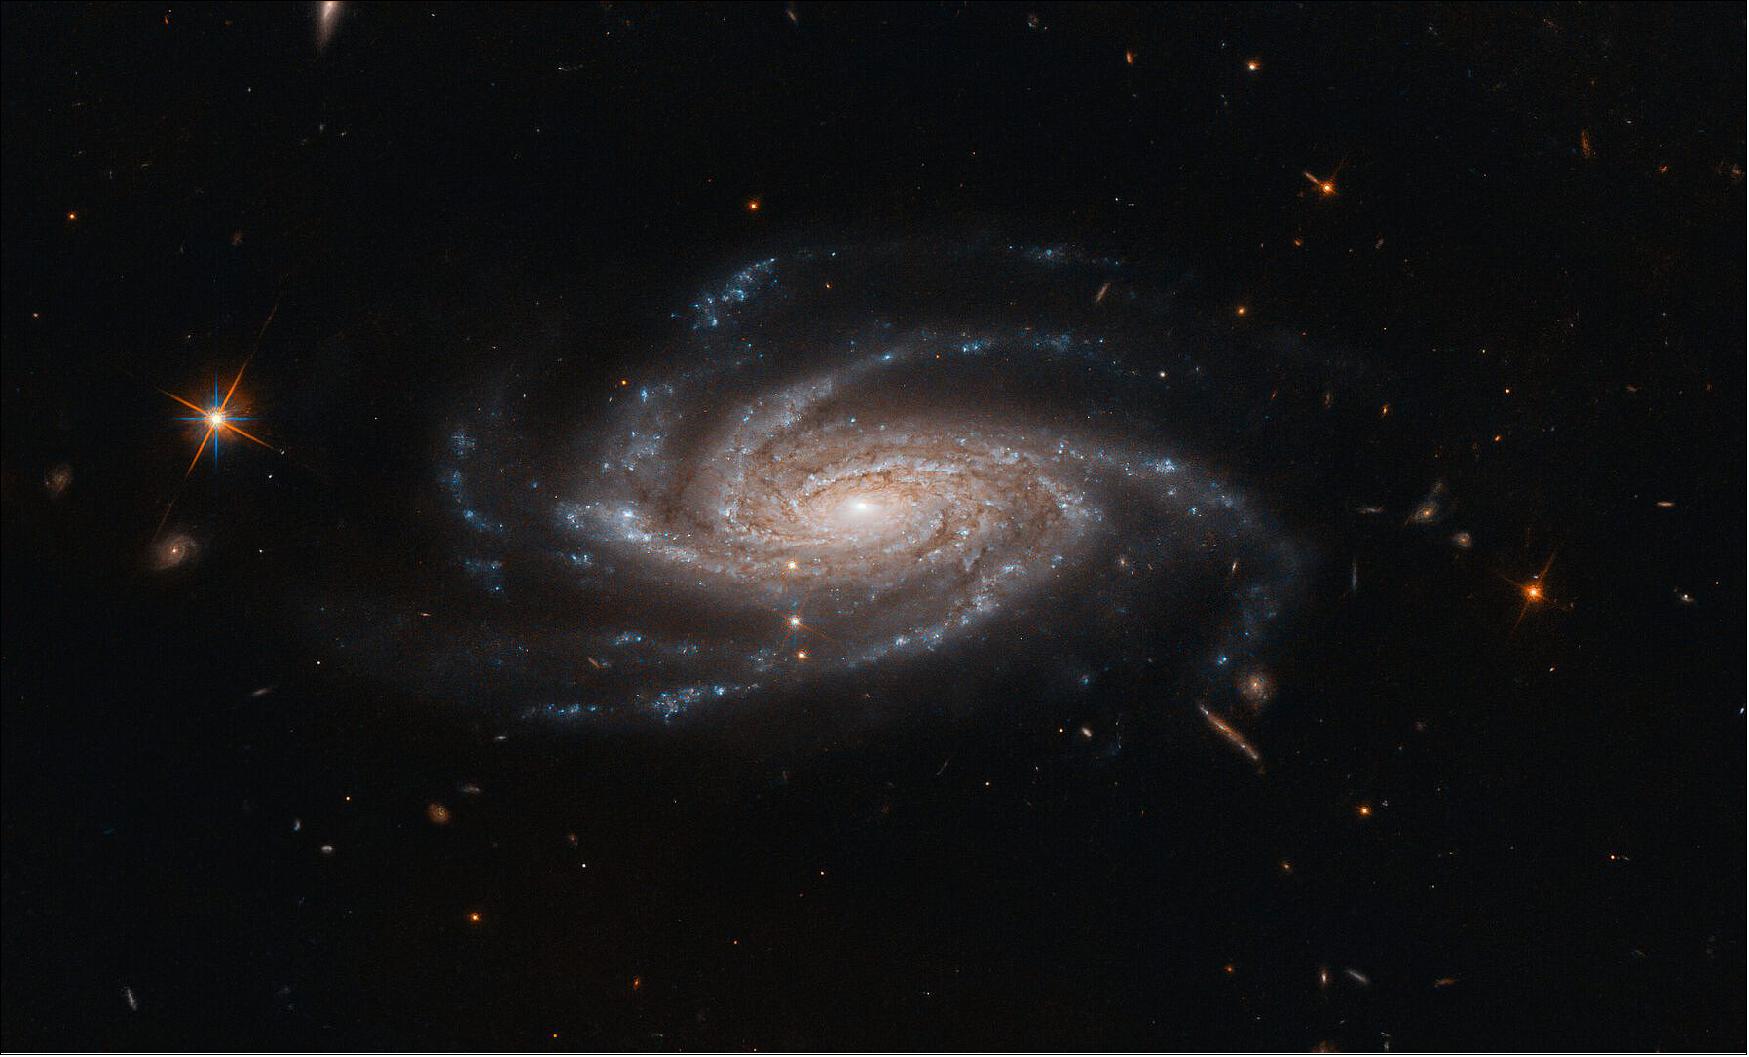 Figure 89: This galaxy is located about 425 million light-years from Earth in the constellation of Pictor (The Painter’s Easel). Discovered in 1834 by astronomer John Herschel, NGC 2008 is categorized as a type Sc galaxy in the Hubble sequence, a system used to describe and classify the various morphologies of galaxies. The “S” indicates that NGC 2008 is a spiral, while the “c” means it has a relatively small central bulge and more open spiral arms. Spiral galaxies with larger central bulges tend to have more tightly wrapped arms, and are classified as Sa galaxies, while those in between are classified as type Sb (image credit: ESA/Hubble & NASA, A. Bellini; CC BY 4.0)